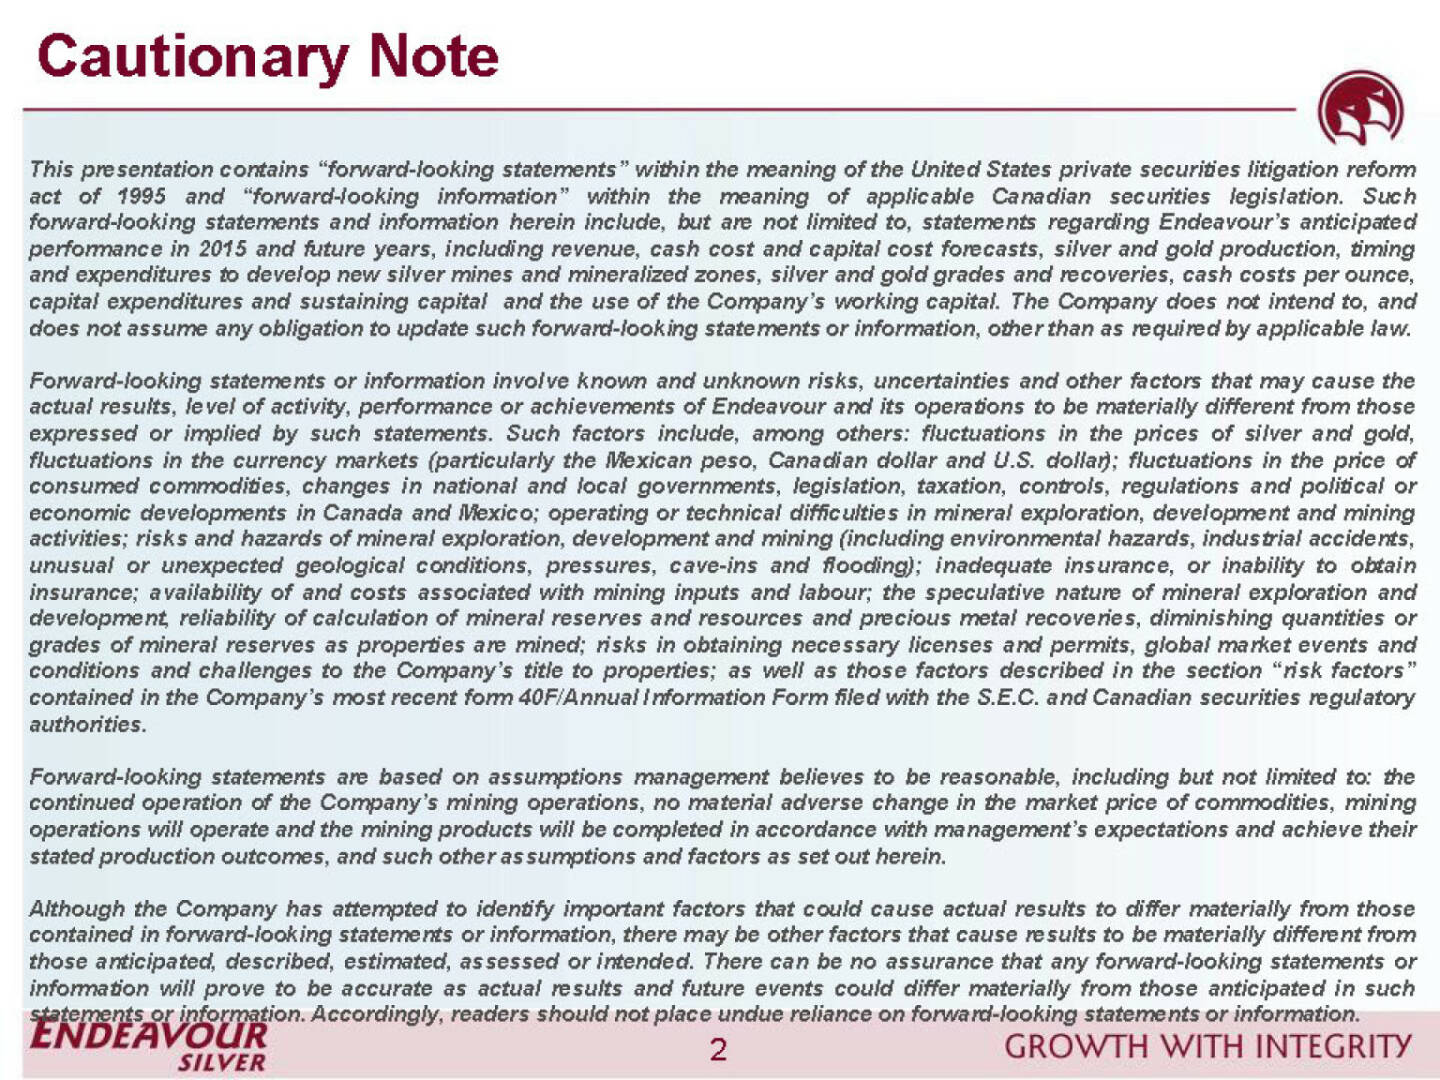 Cautionary Note - Endeavour Silver